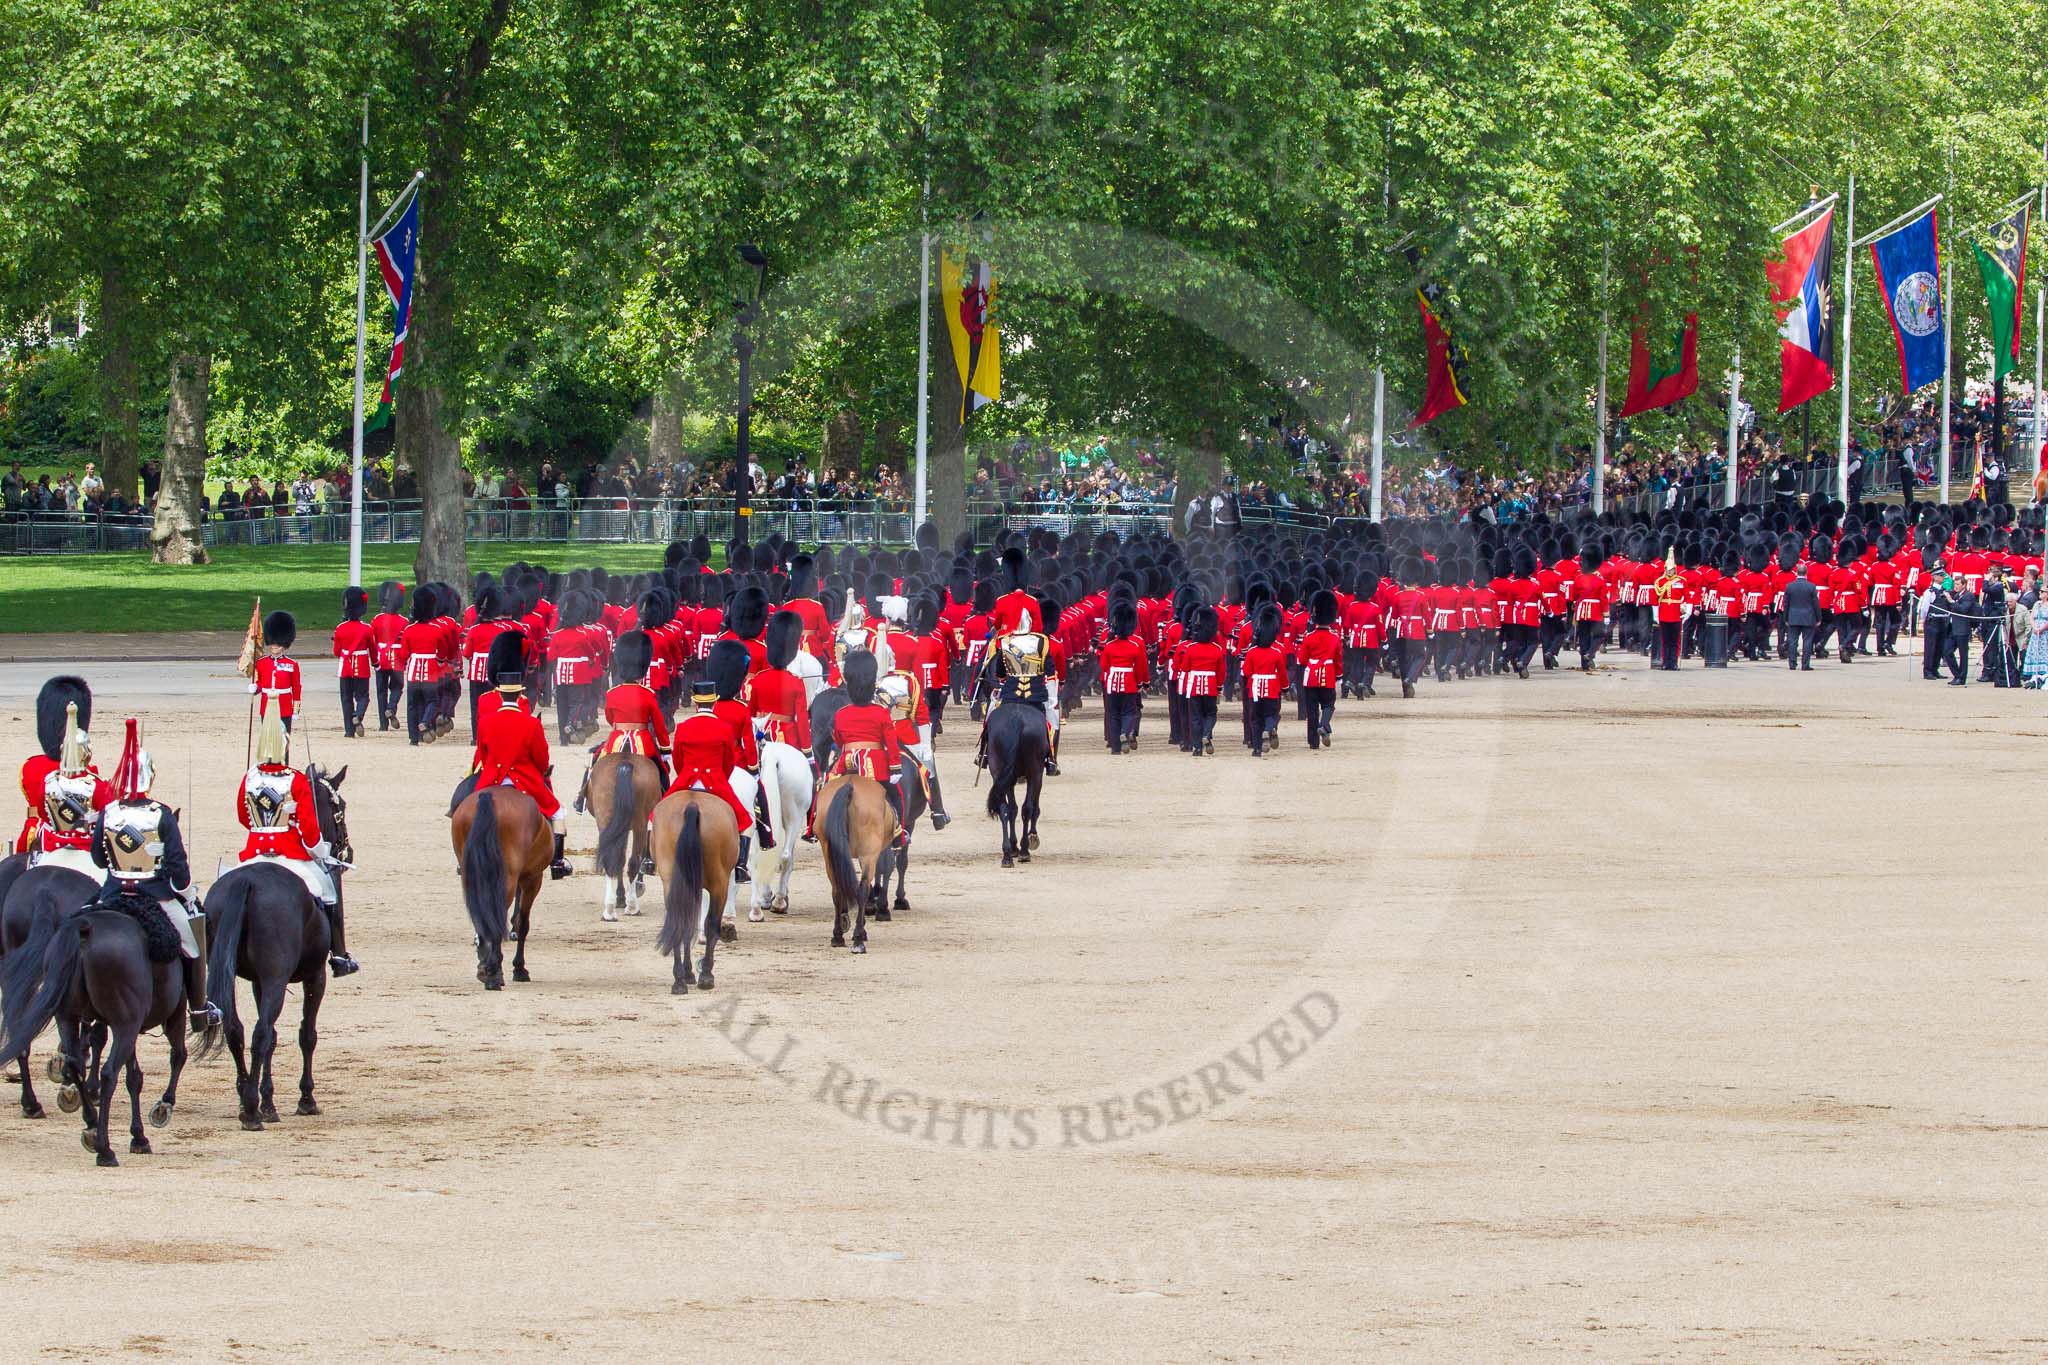 The Colonel's Review 2013.
Horse Guards Parade, Westminster,
London SW1,

United Kingdom,
on 08 June 2013 at 12:11, image #869